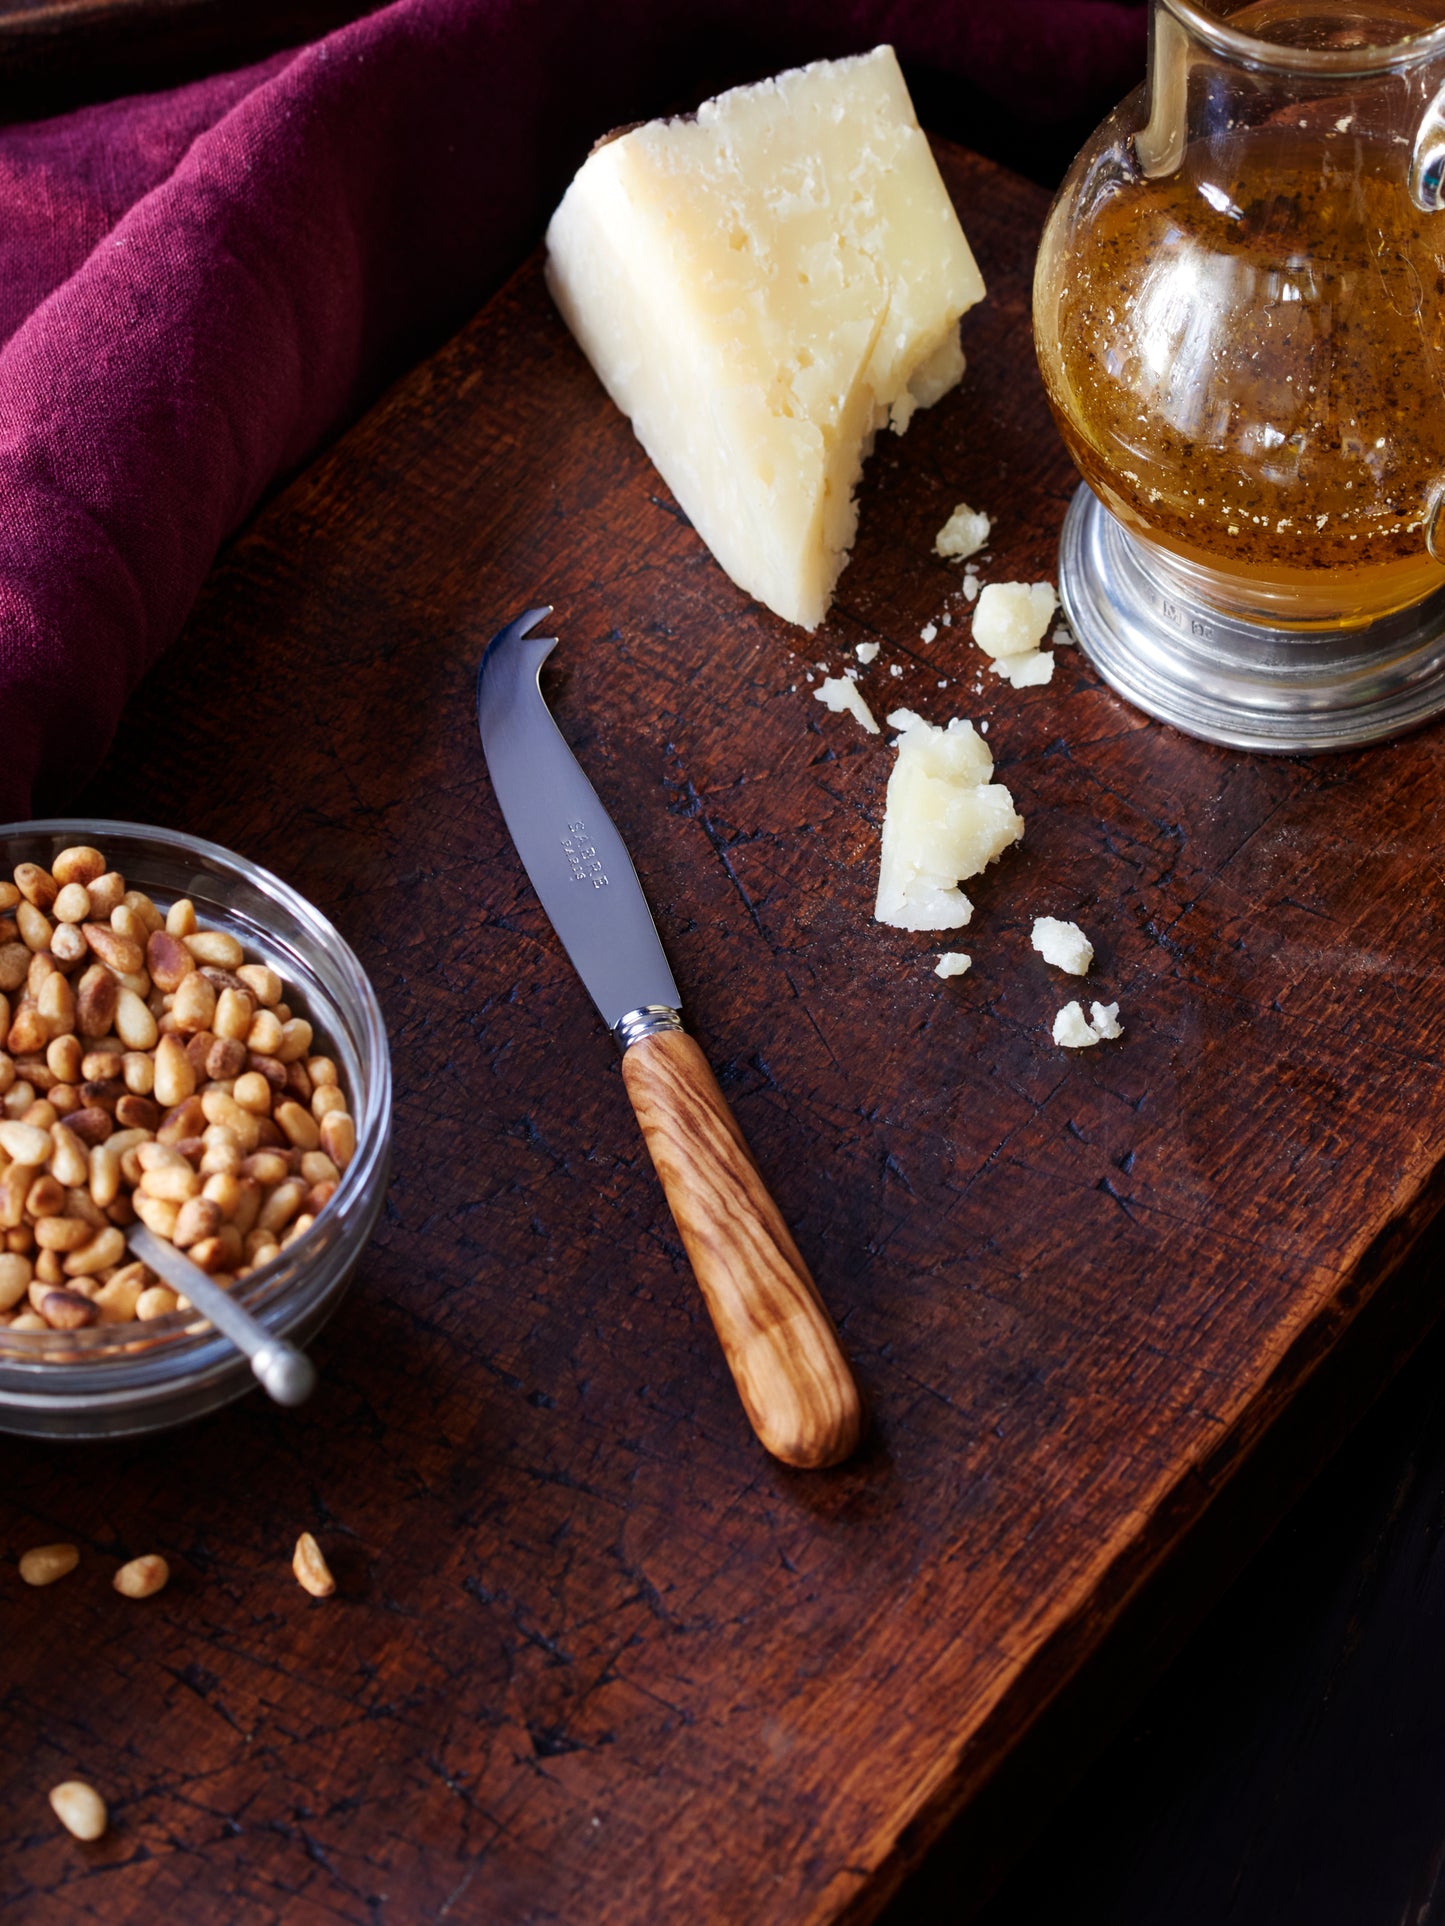 Shop Birdseye Maple Cheese Knives at Weston Table